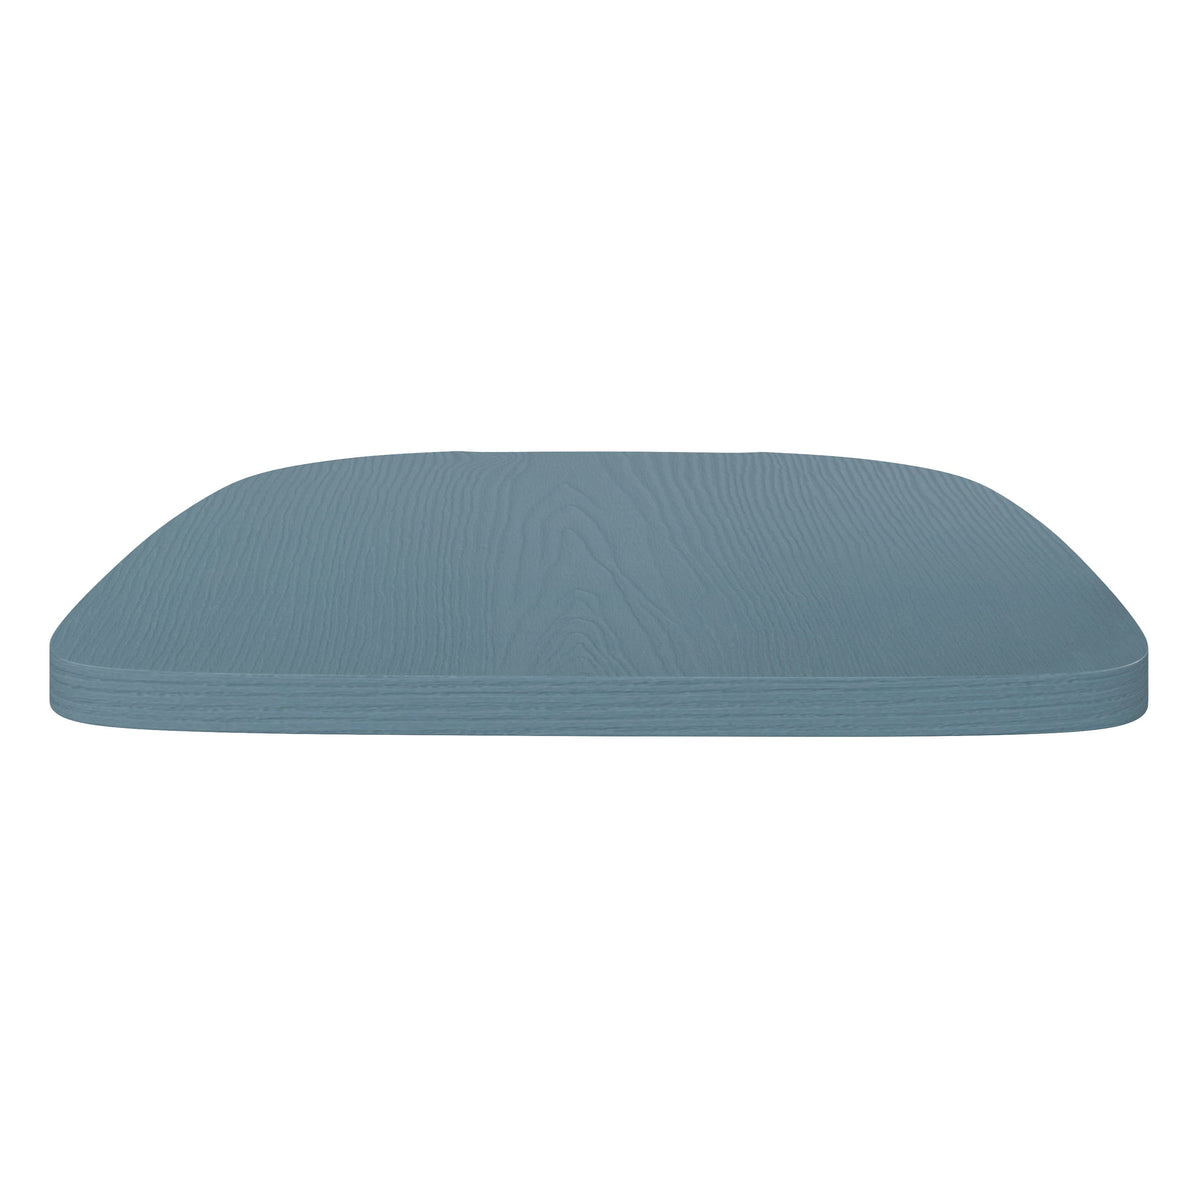 Teal-Blue |#| All-Weather Polystyrene Seat for Colorful Metal Stools and Chairs - Teal-Blue